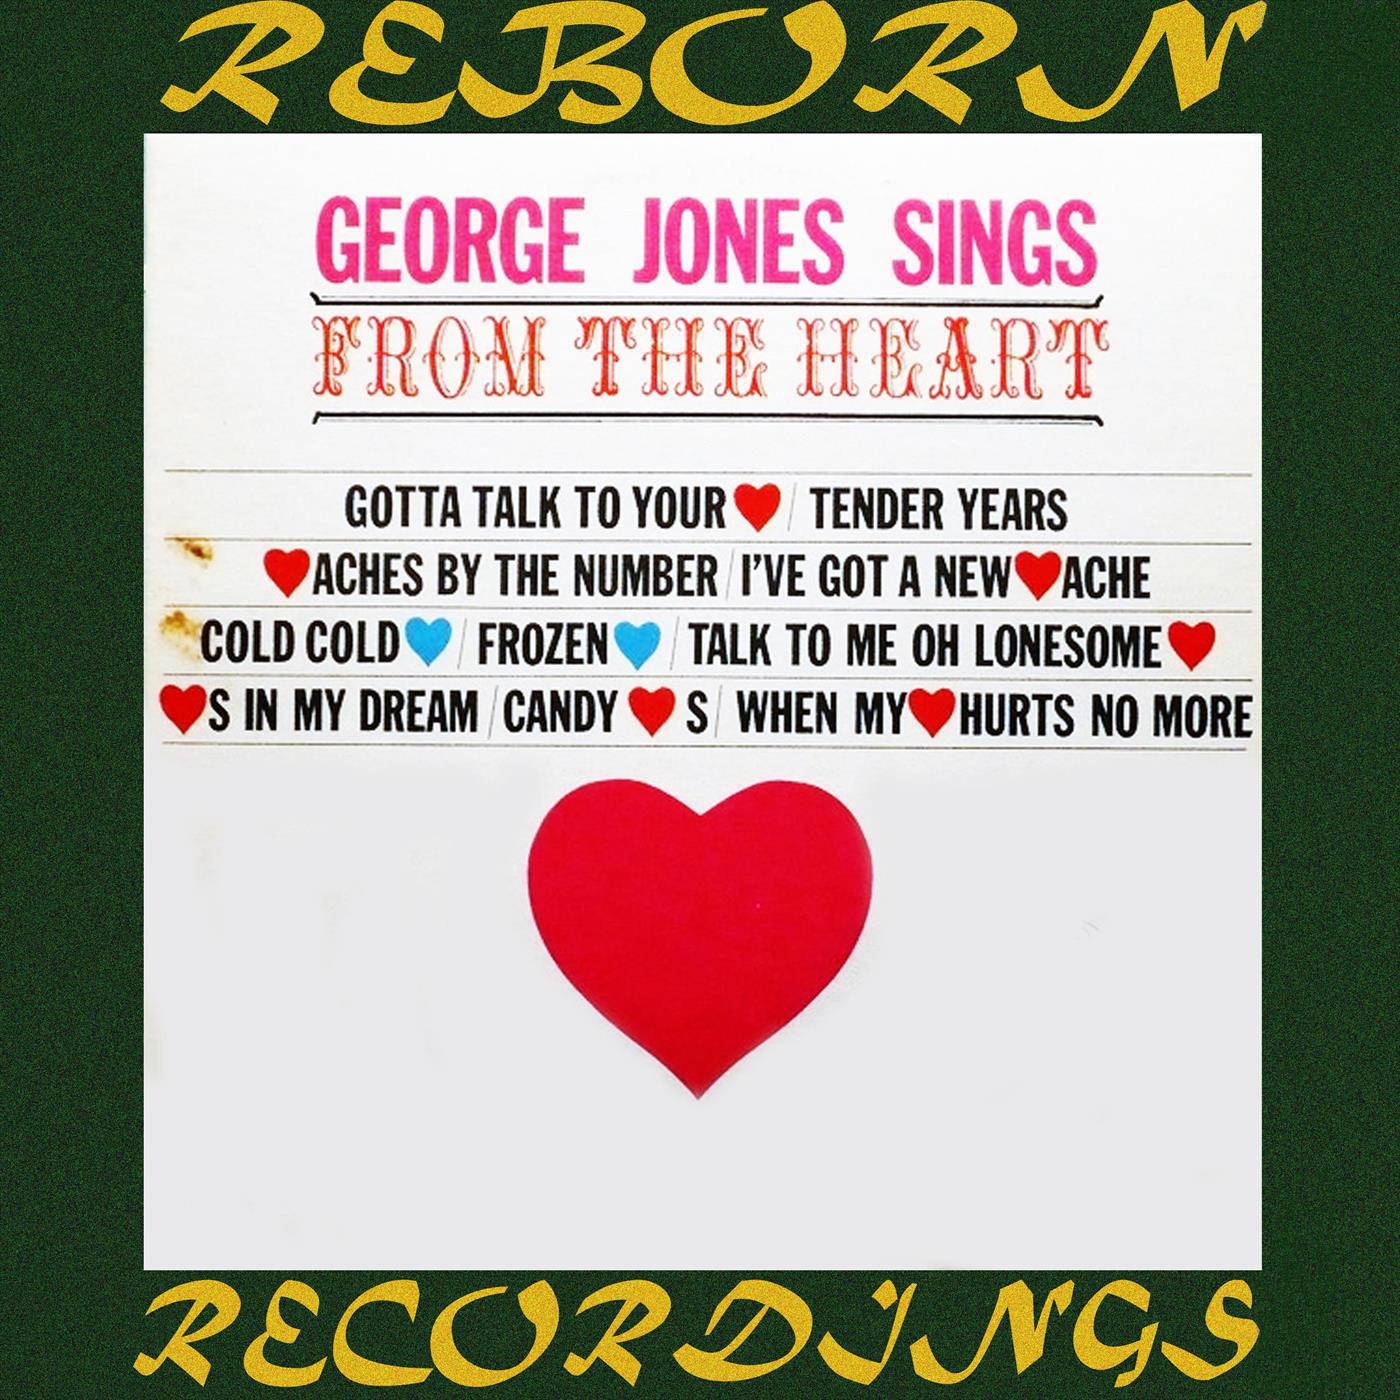 George Jones - Sings From The Heart10 - I Gotta Talk to Your Heart